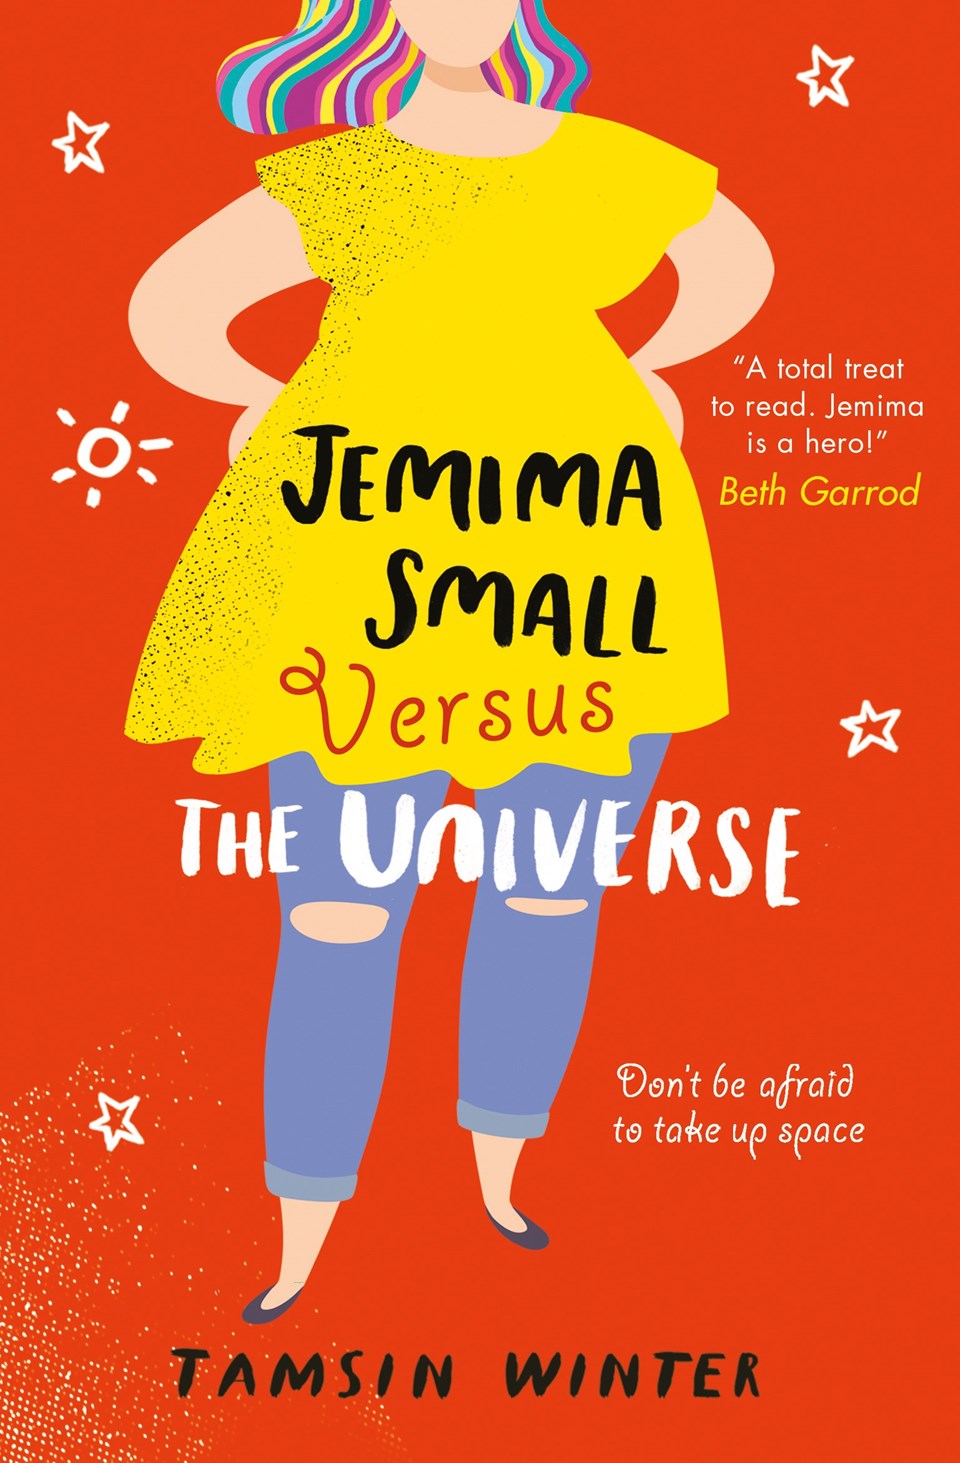 Book Review : Jemima Small Versus the Universe by Tamsin Winter